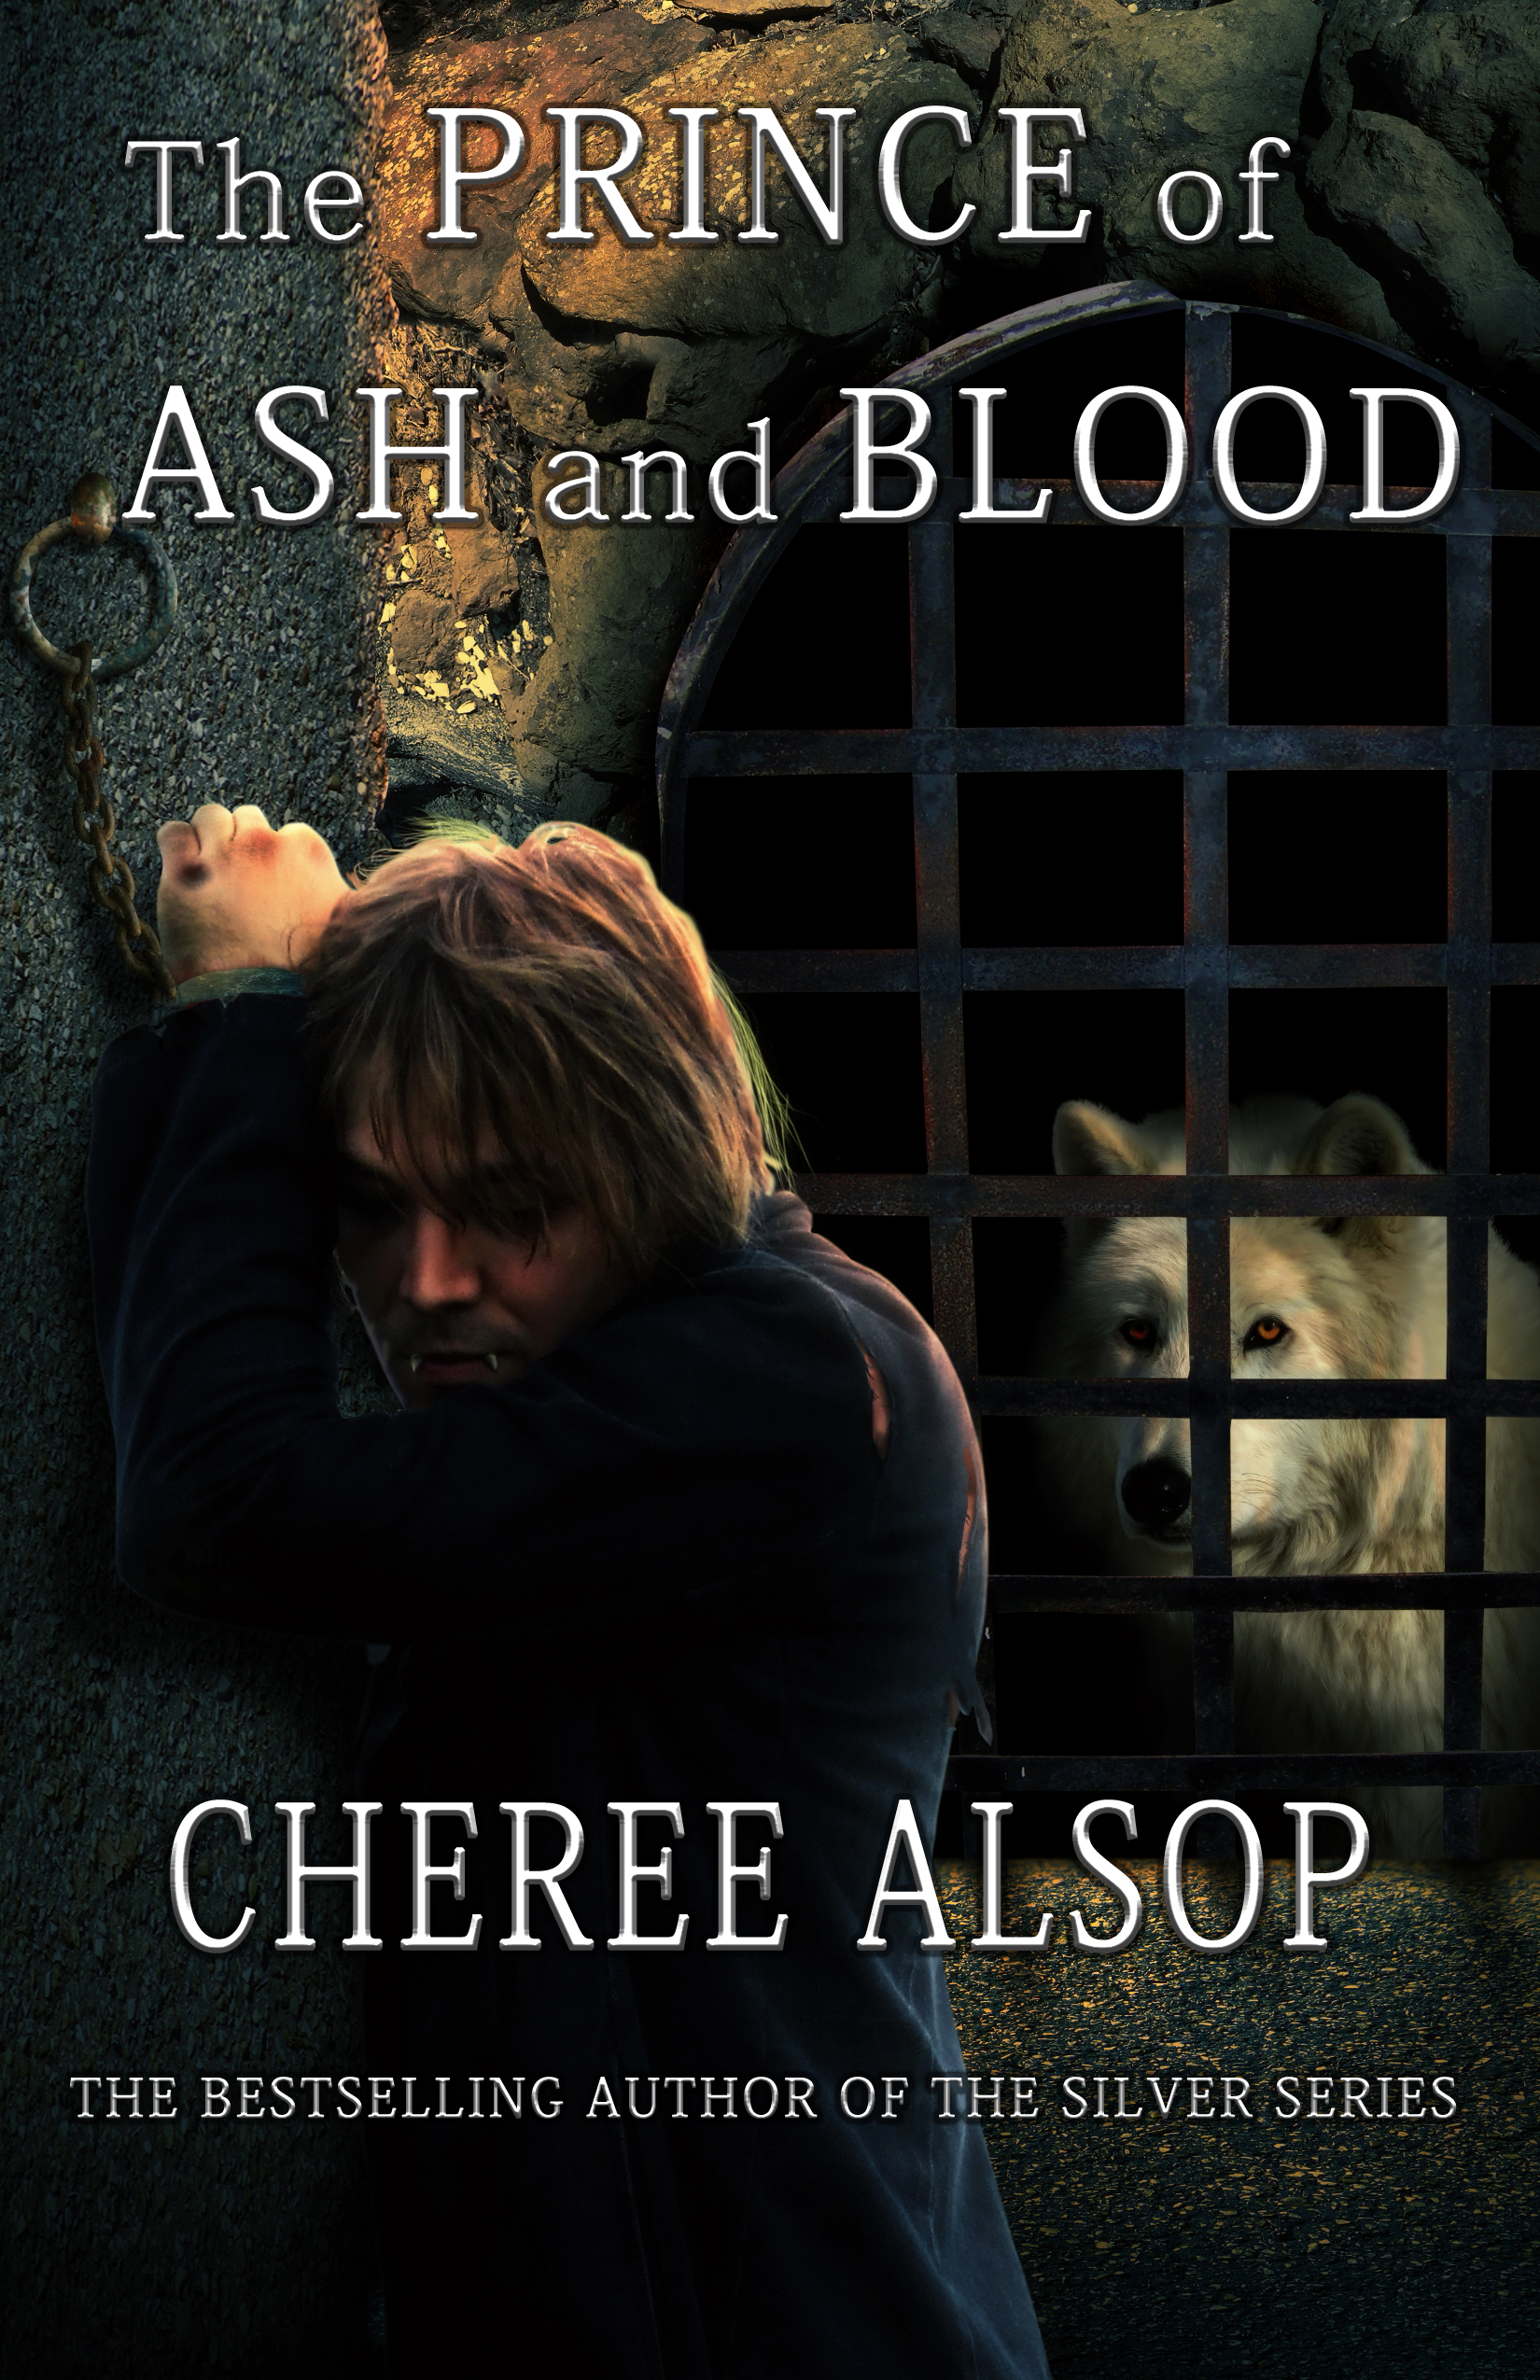 The Prince of Ash and Blood by Cheree Alsop GIVEAWAY